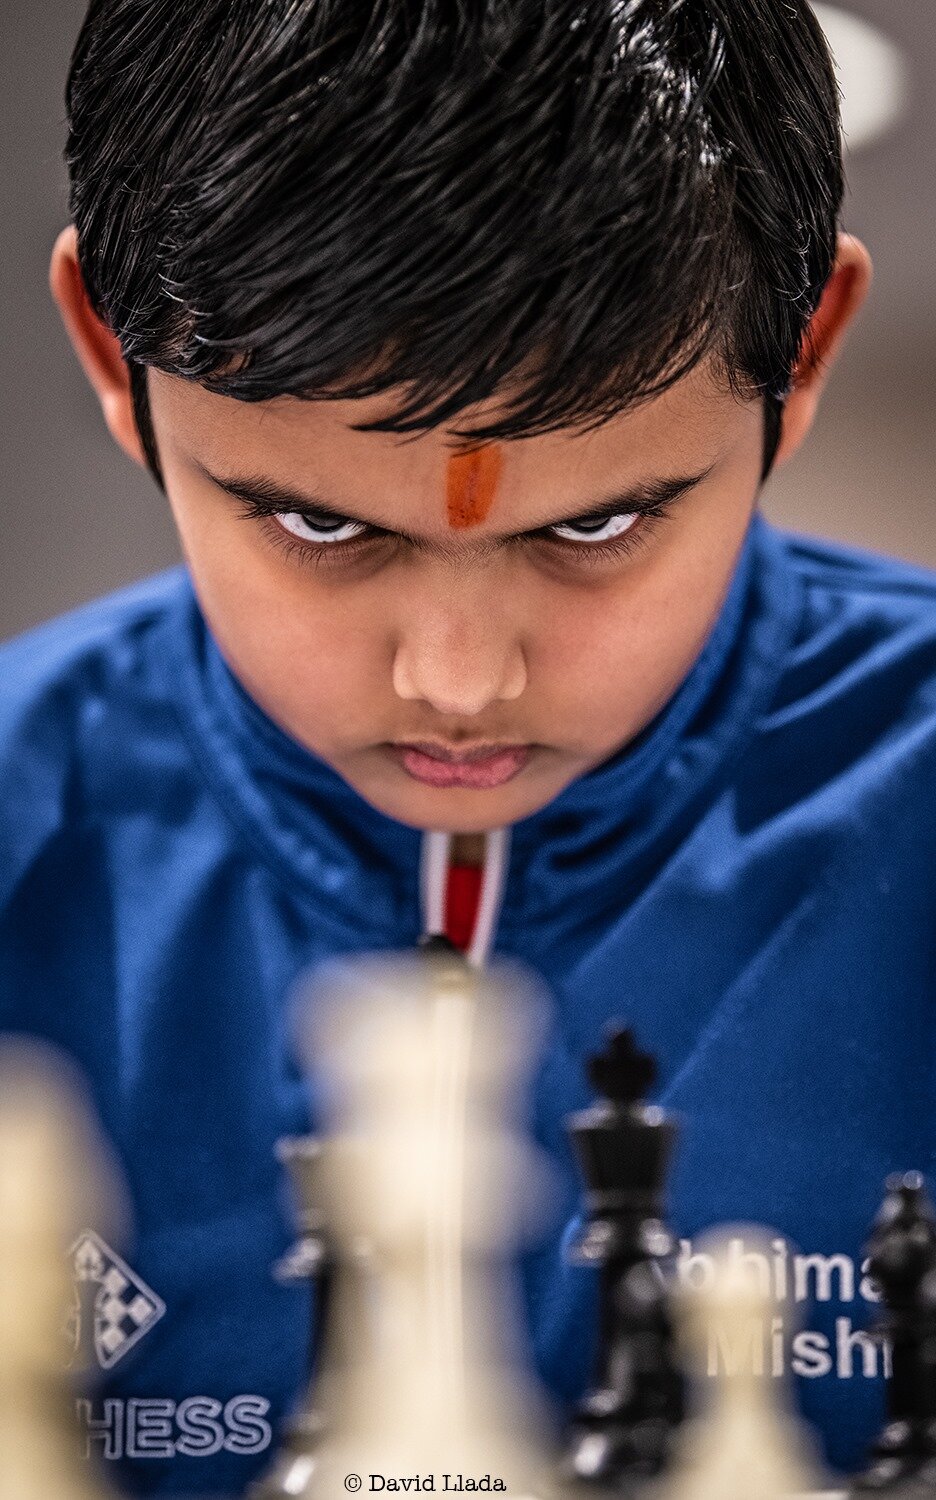 Youngest International Chess Master in History